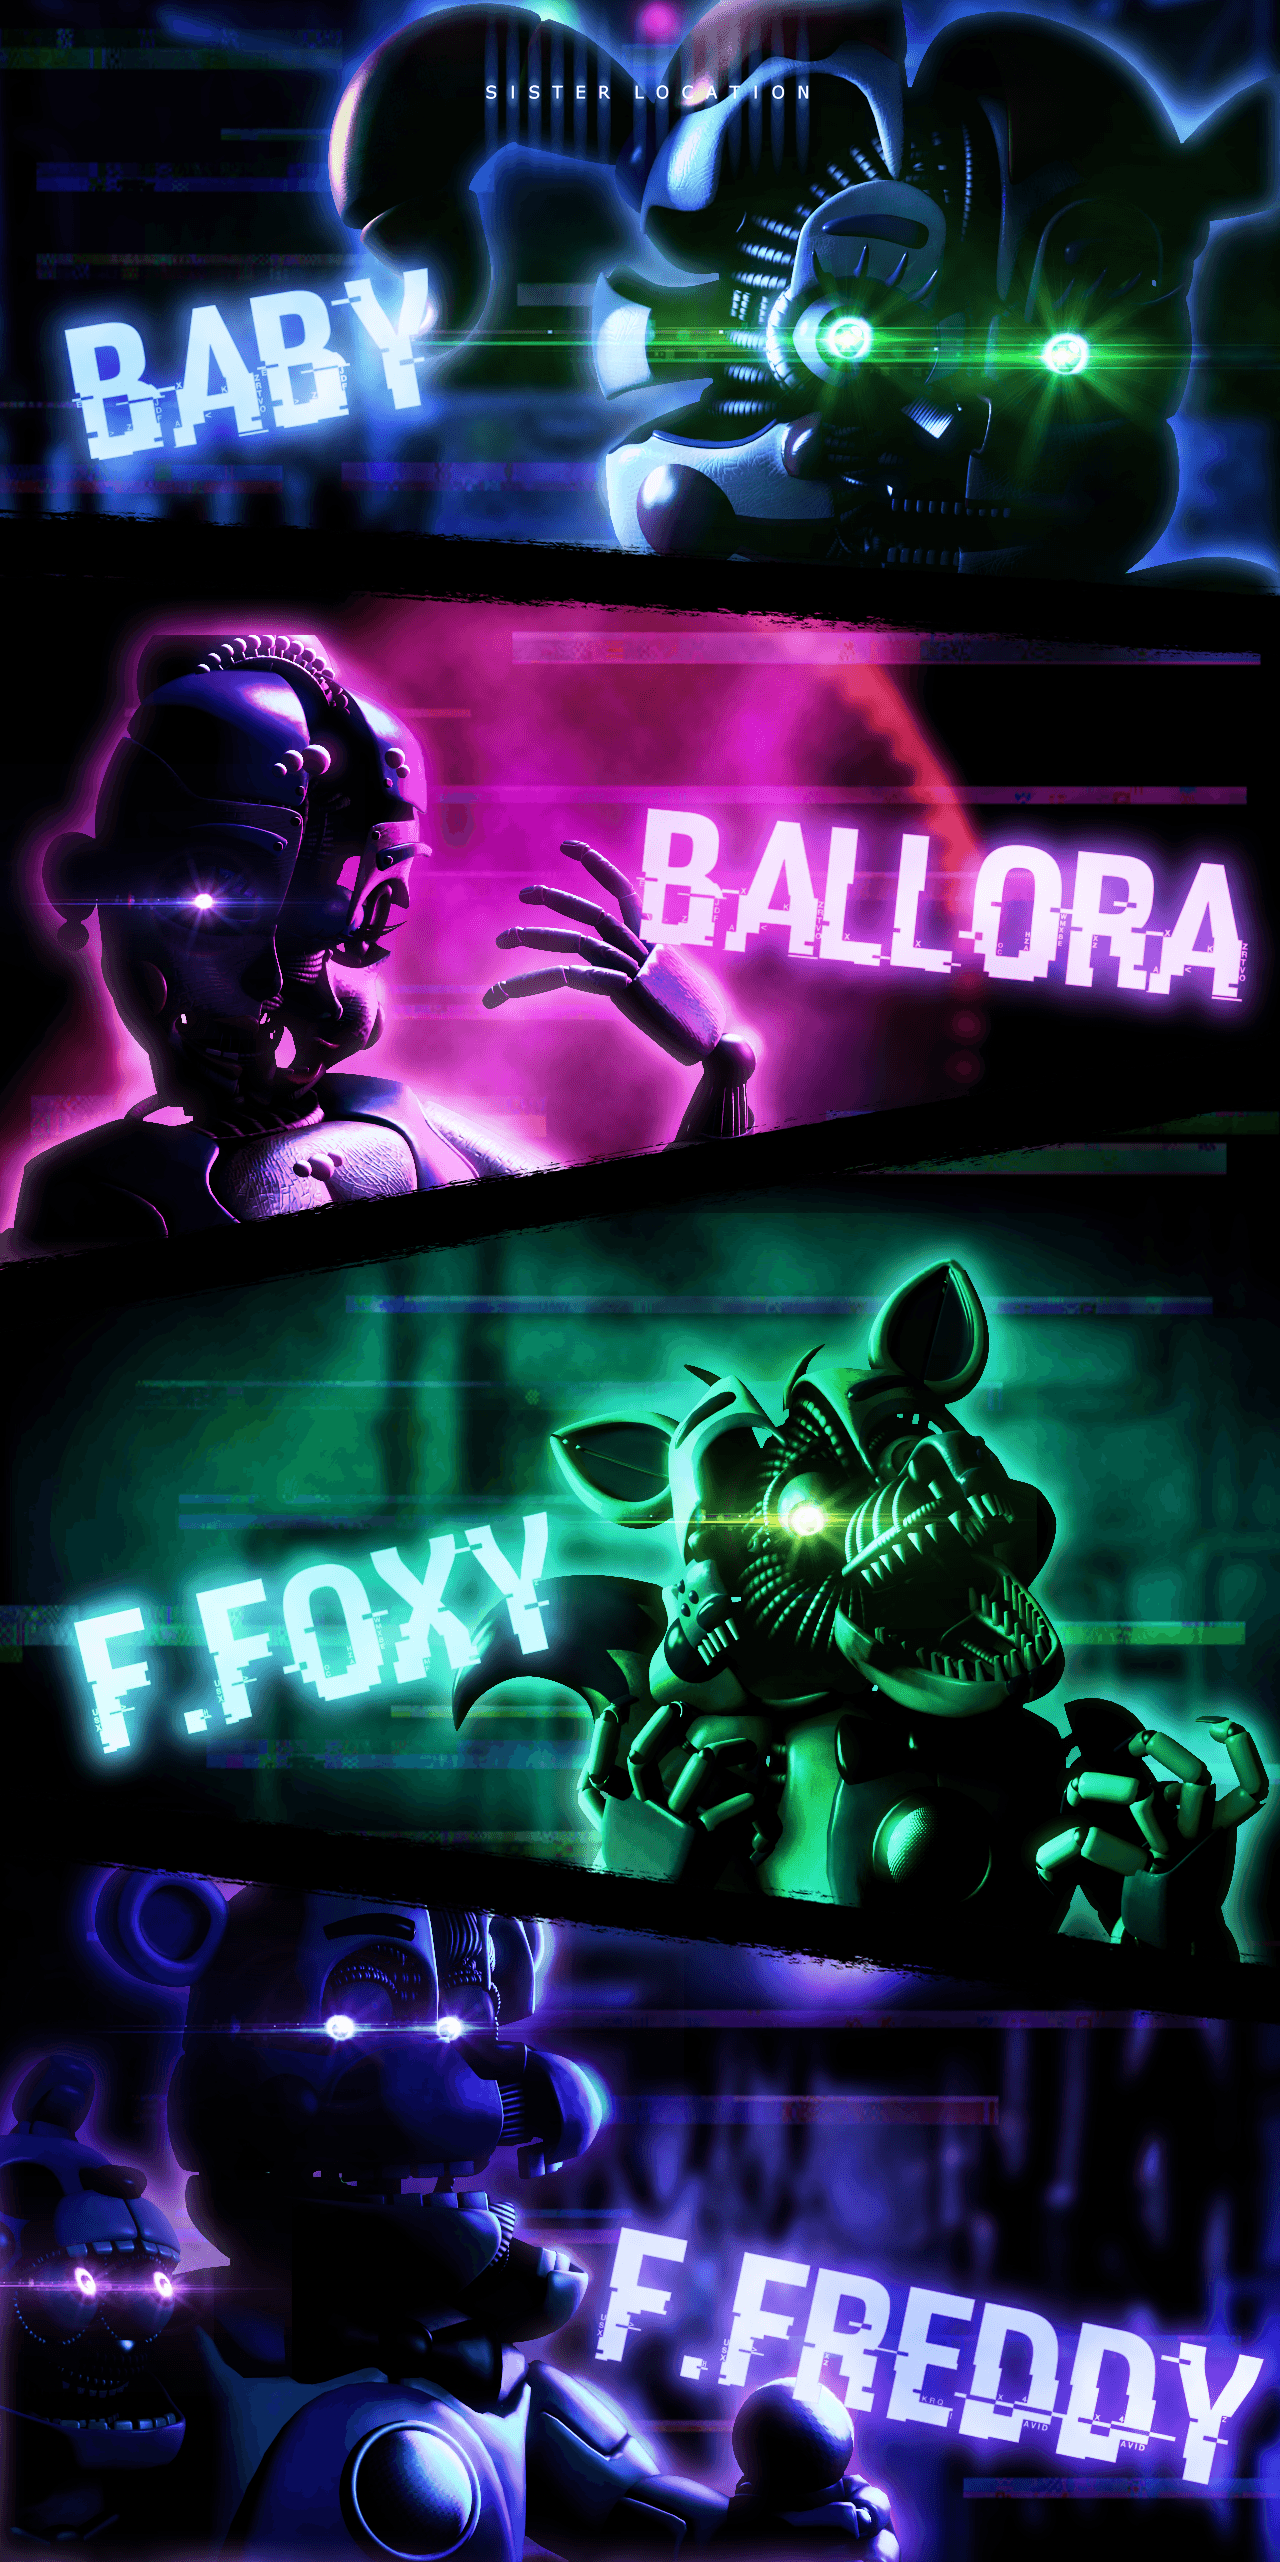 Ballora Foxy Five Nights at Freddys Sister Location HD FNAF Wallpapers   HD Wallpapers  ID 46853